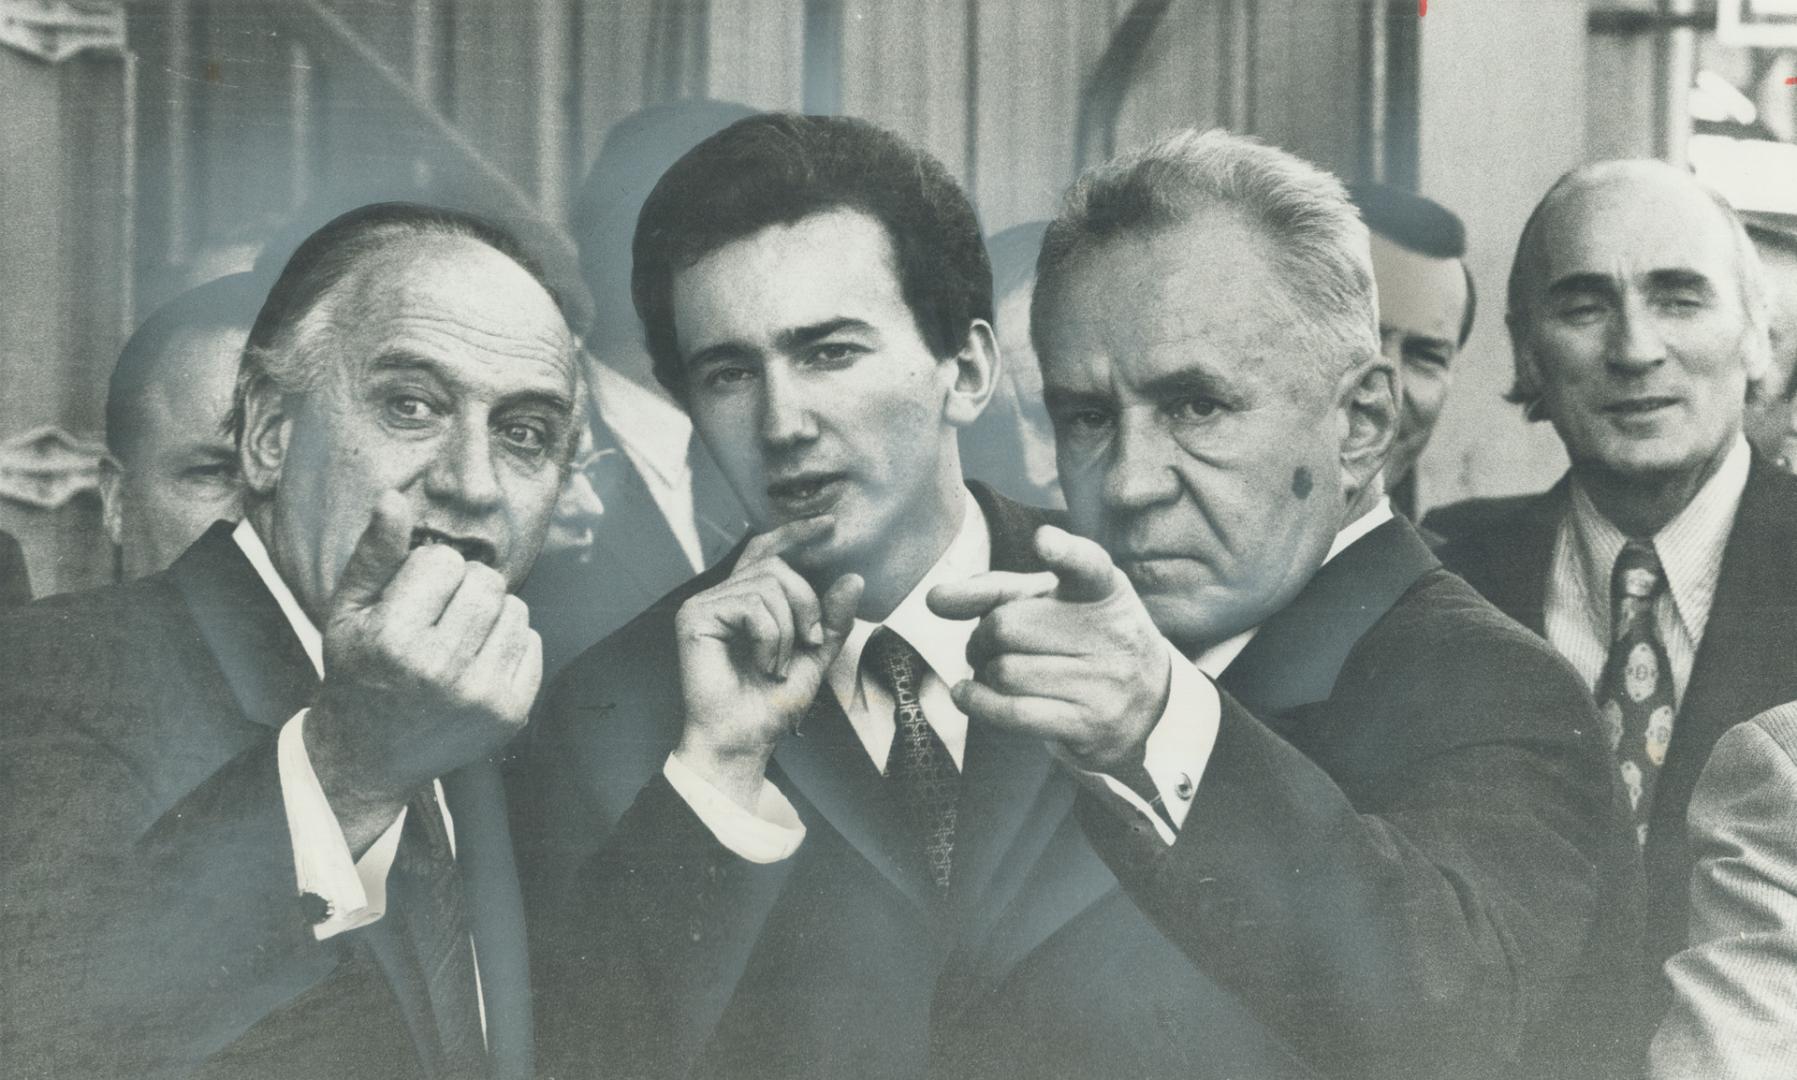 Taking a hard-eyed look at things on the Montreal waterfront, touring Soviet Premier Alexei Kosygin (right) points toward operation he wants to ask Manchester Line shipping official (left) about, while interpreter (centre) translates for him